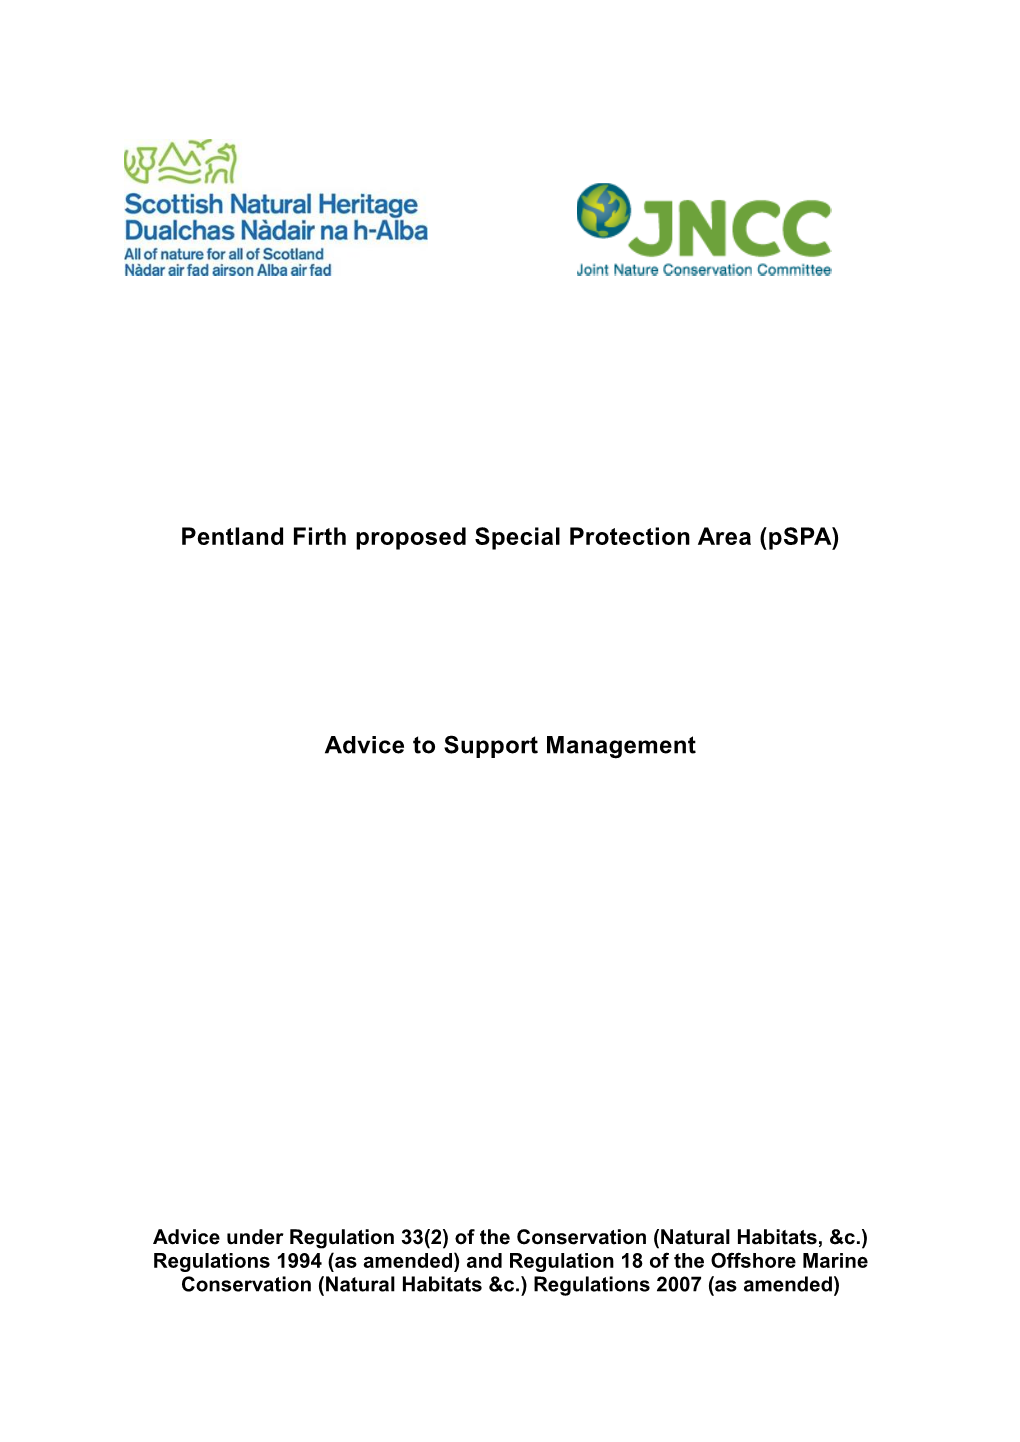 Pentland Firth Proposed Special Protection Area (Pspa)